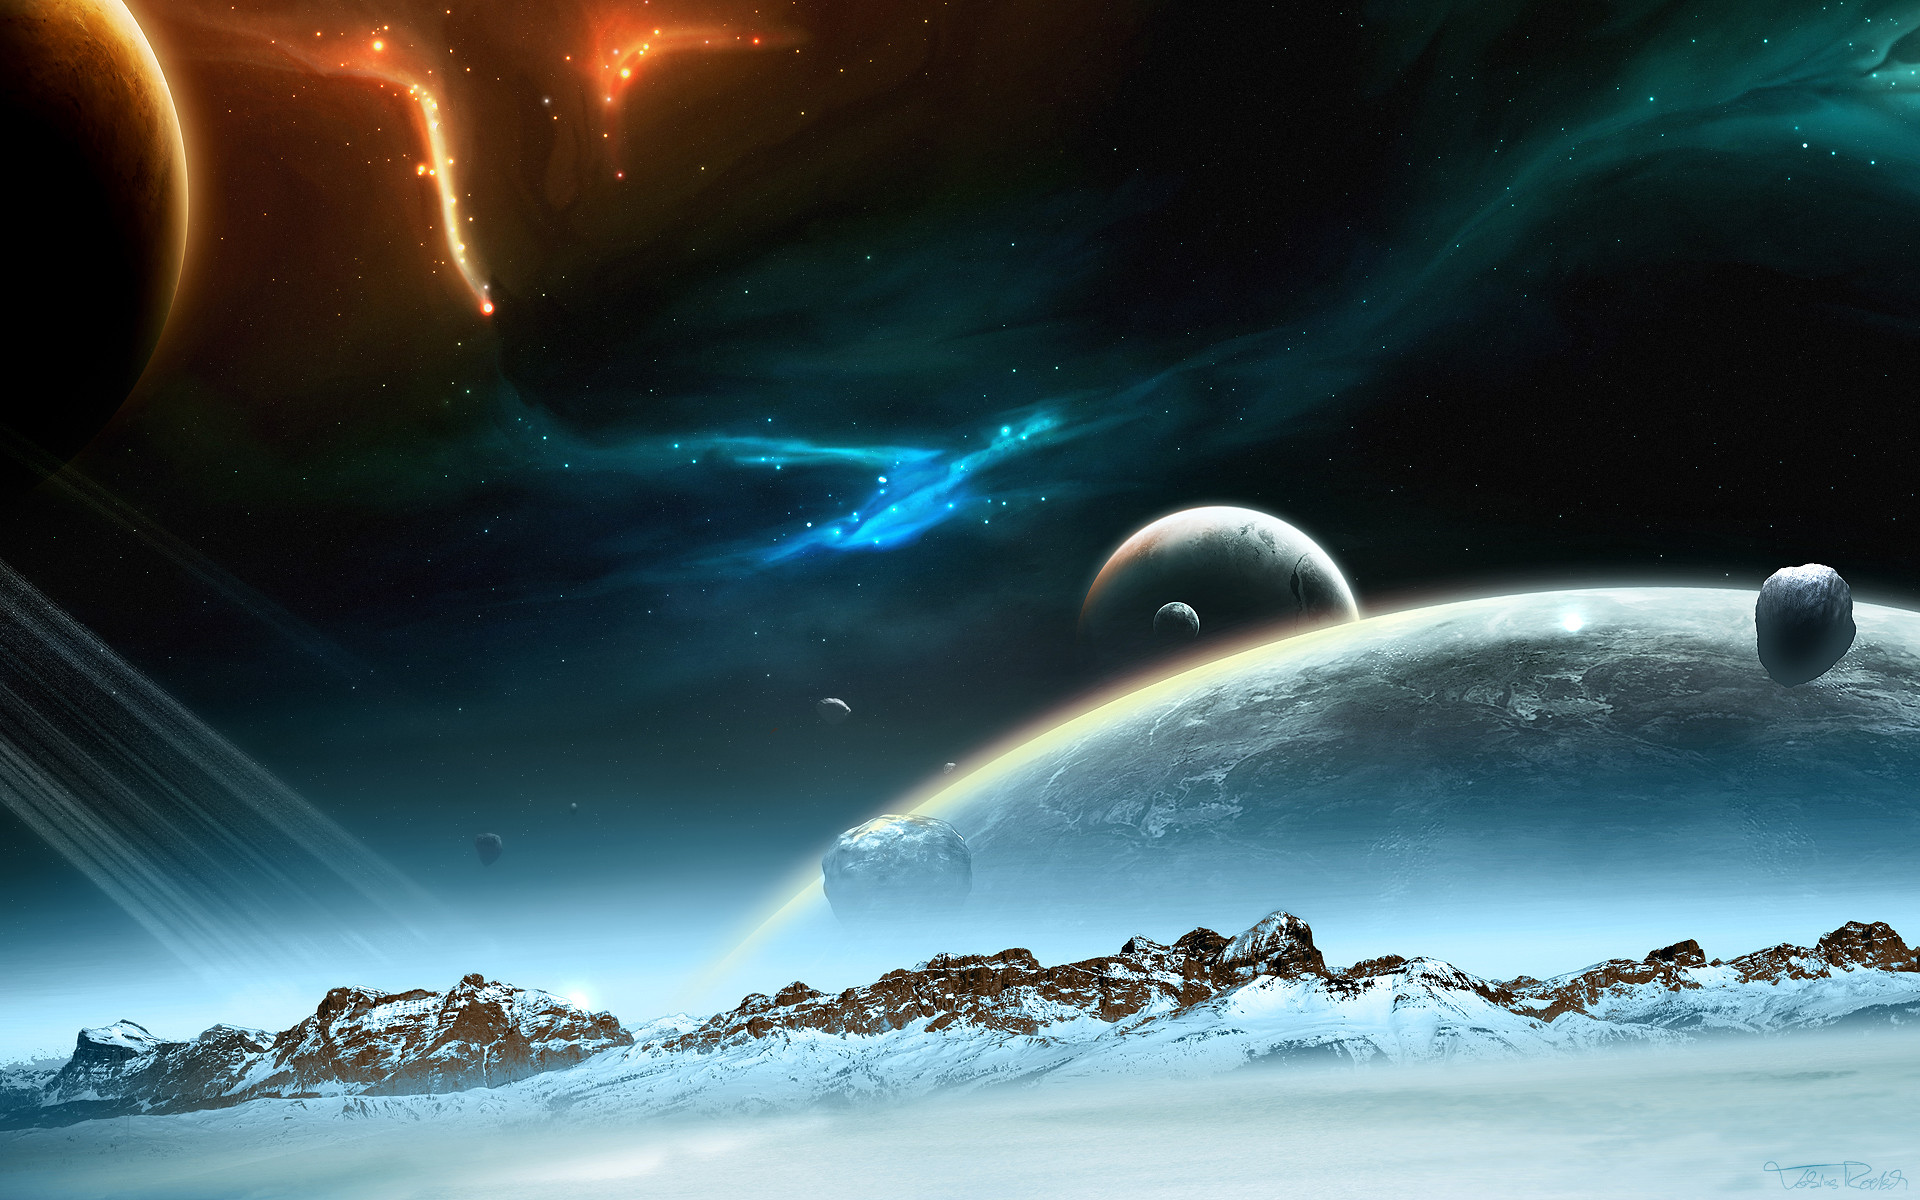 Search Results for “hd wallpaper space art” – Adorable Wallpapers